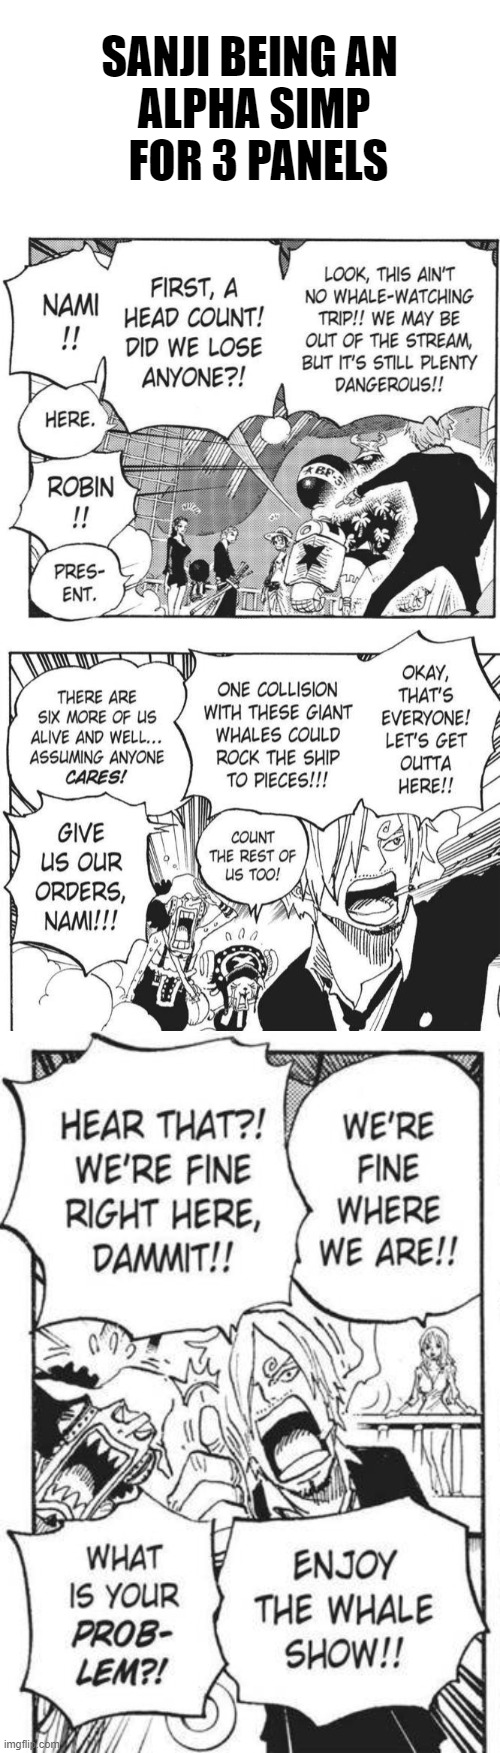 Show me a bigger simp, I'll wait. | SANJI BEING AN 
ALPHA SIMP
 FOR 3 PANELS | image tagged in memes,one piece,funny,sanji,simp,comics/cartoons | made w/ Imgflip meme maker